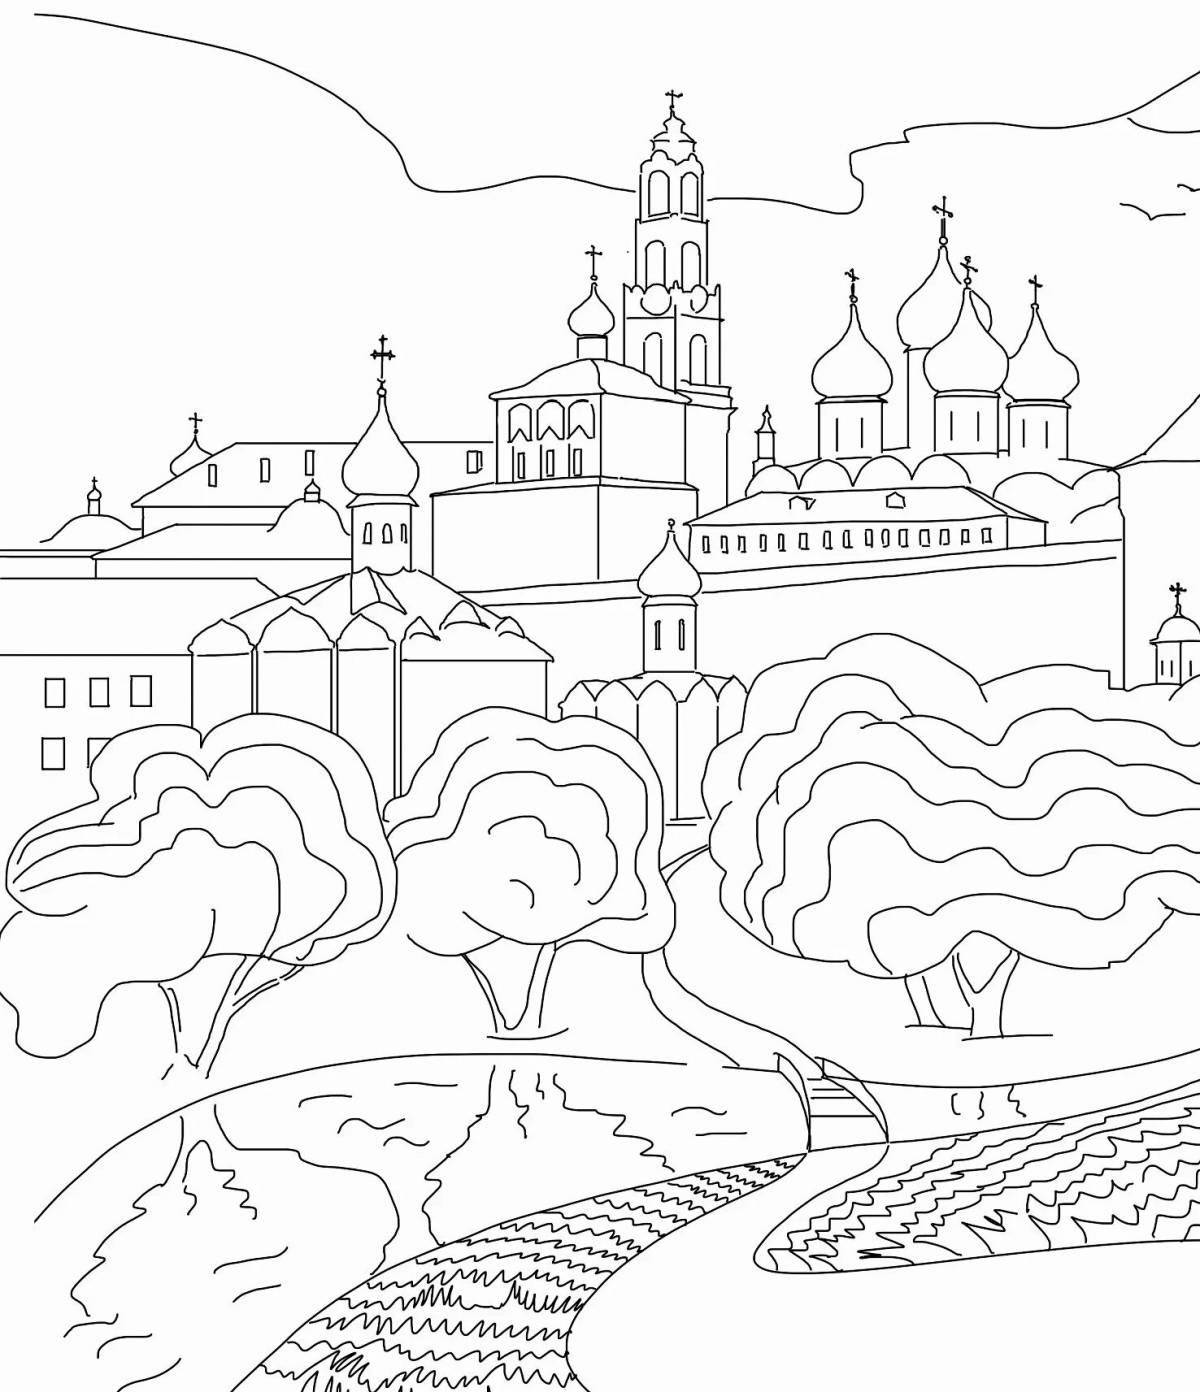 Brilliant coloring pages sights of russia